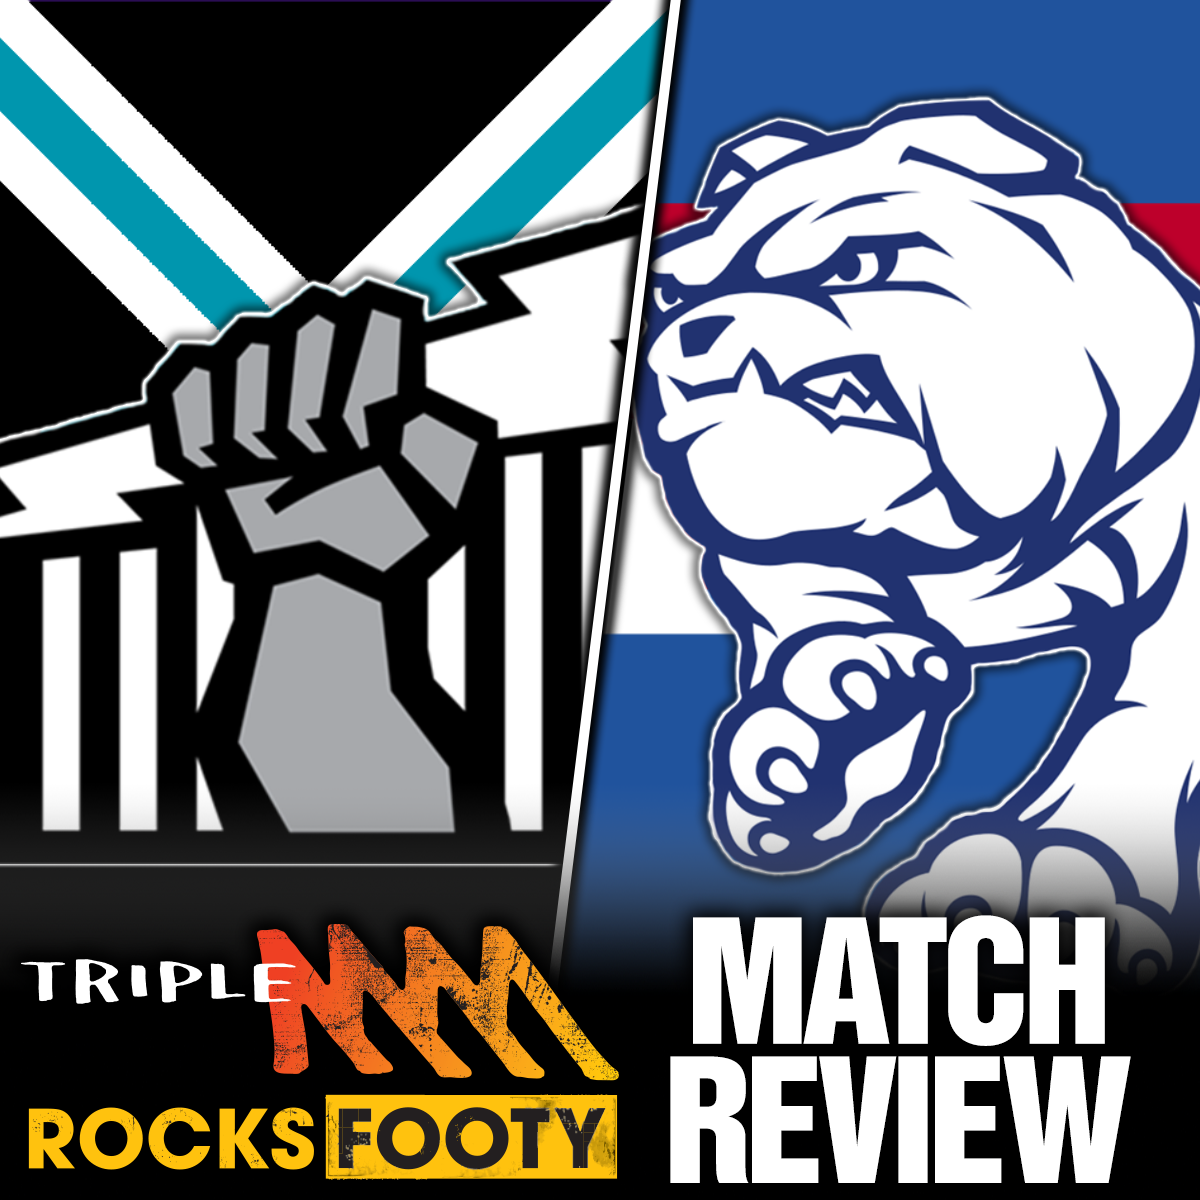 Port Adelaide vs Western Bulldogs Match Review